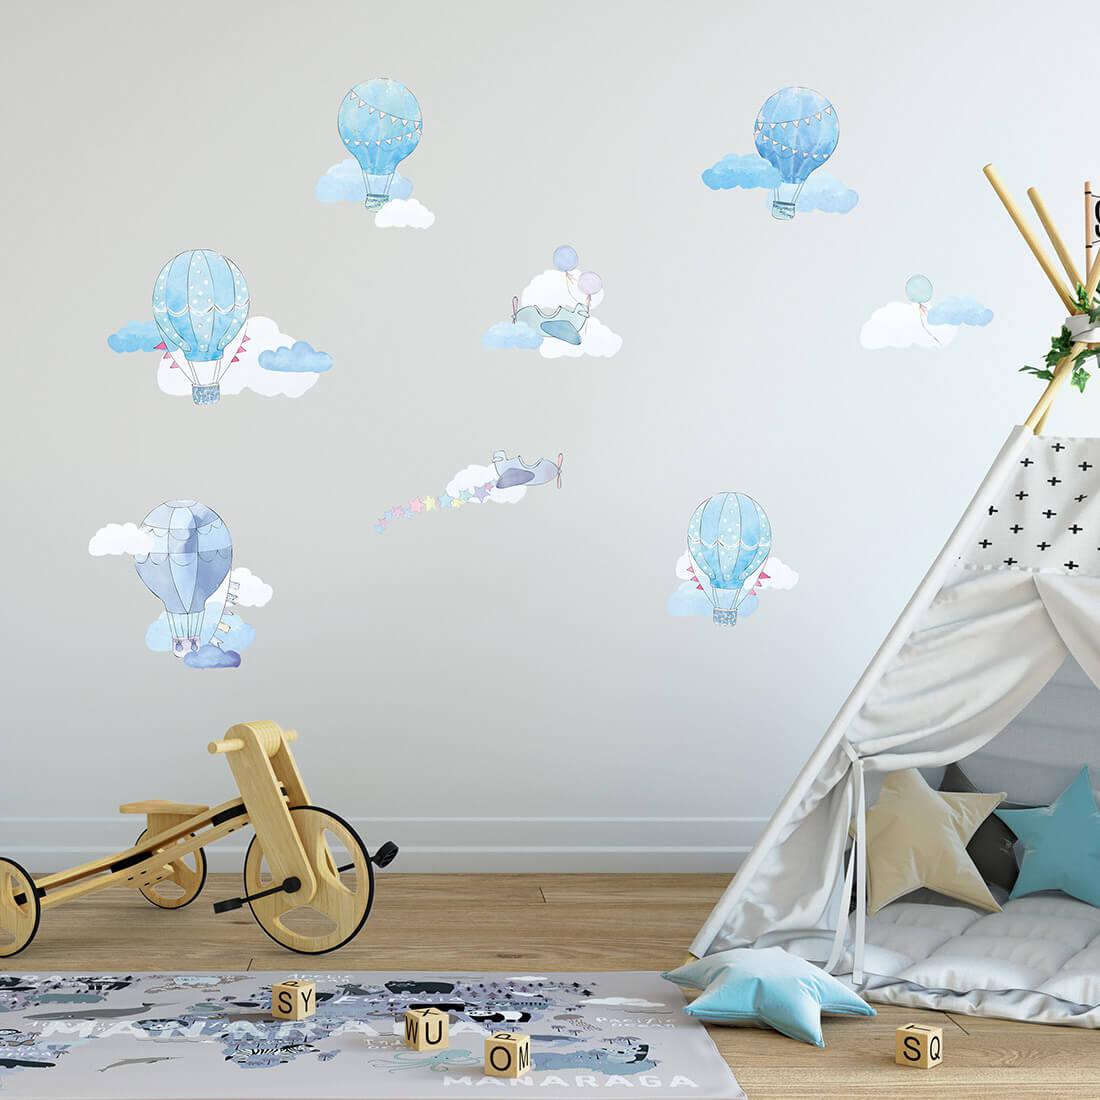 Wall Stickers - Blue Balloons